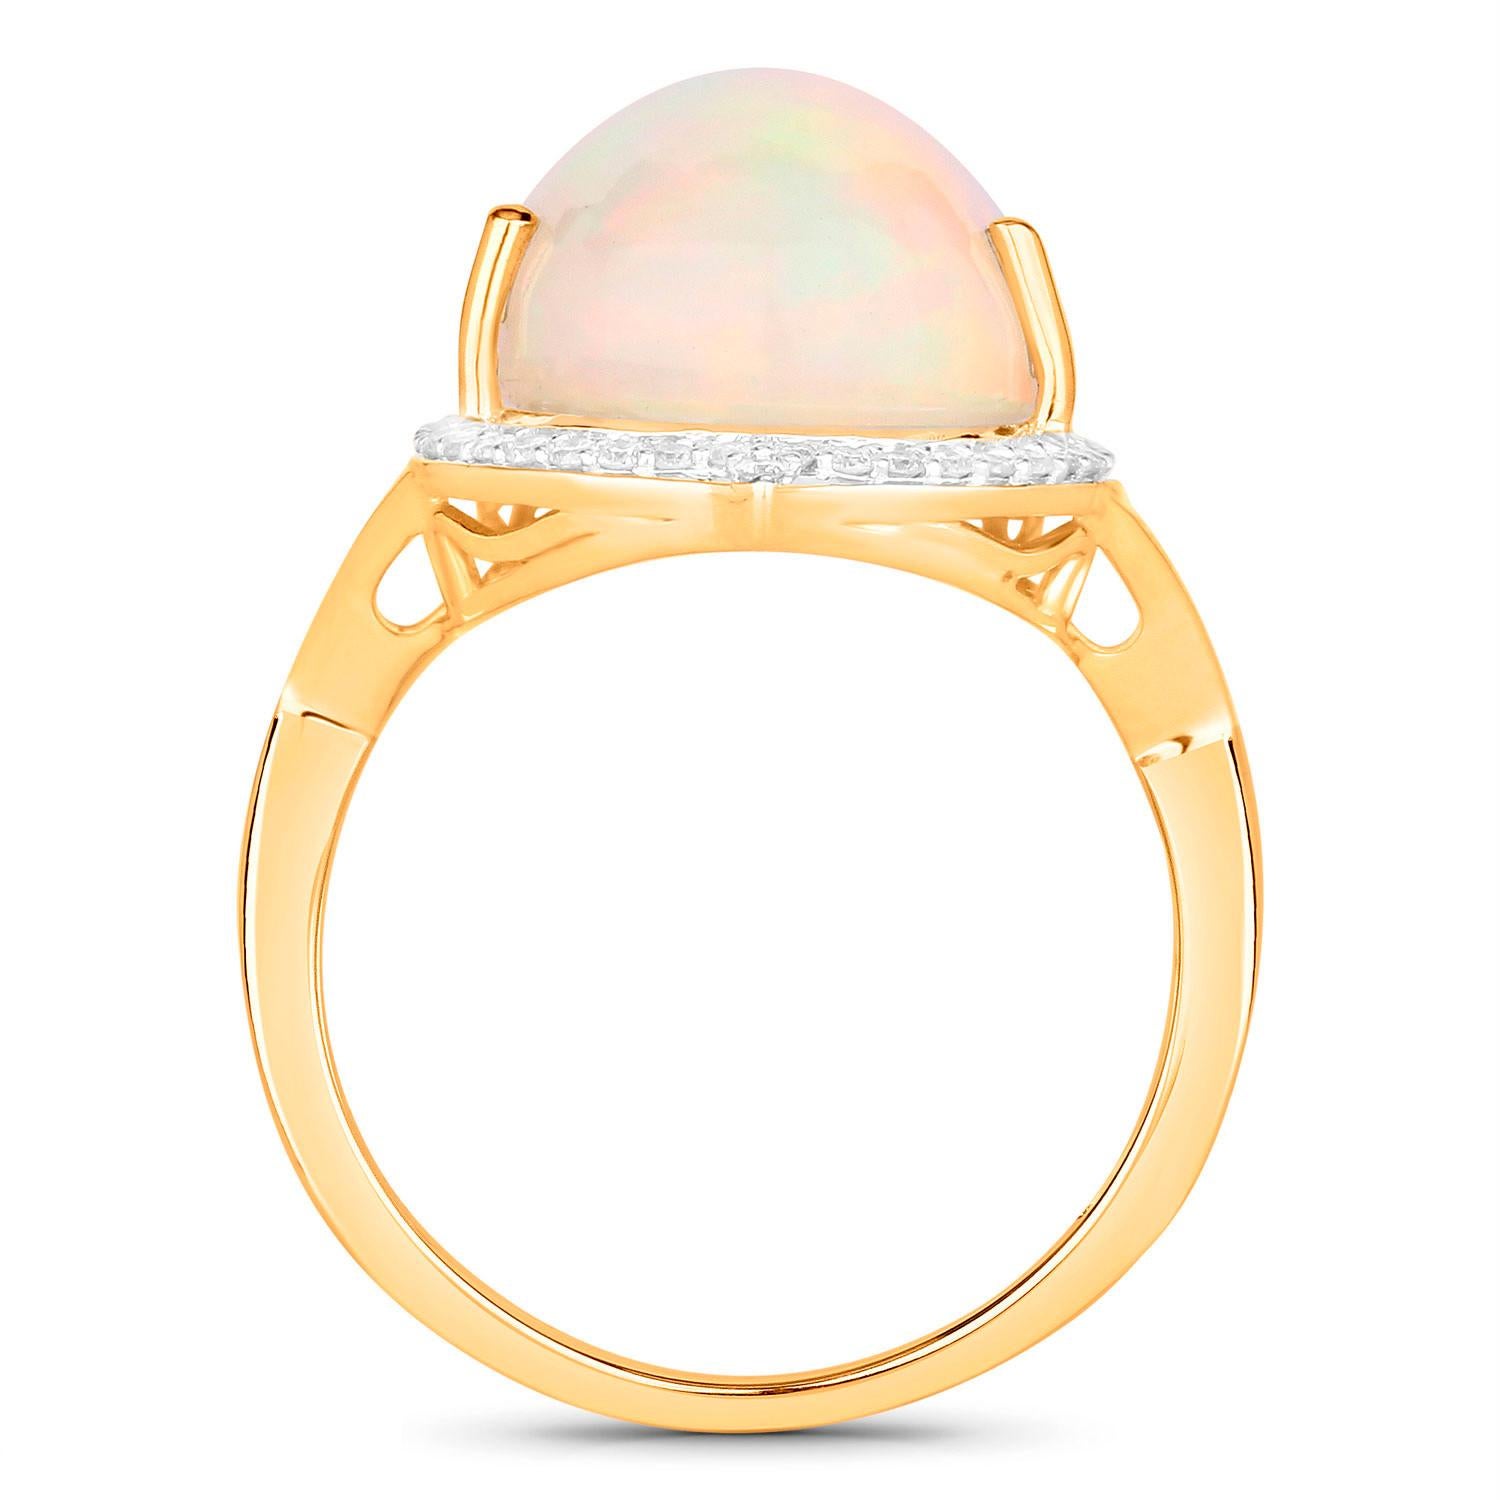 Natural Opal Cocktail Ring Diamond Halo 7.86 Carats 14K Yellow Gold In Excellent Condition For Sale In Laguna Niguel, CA